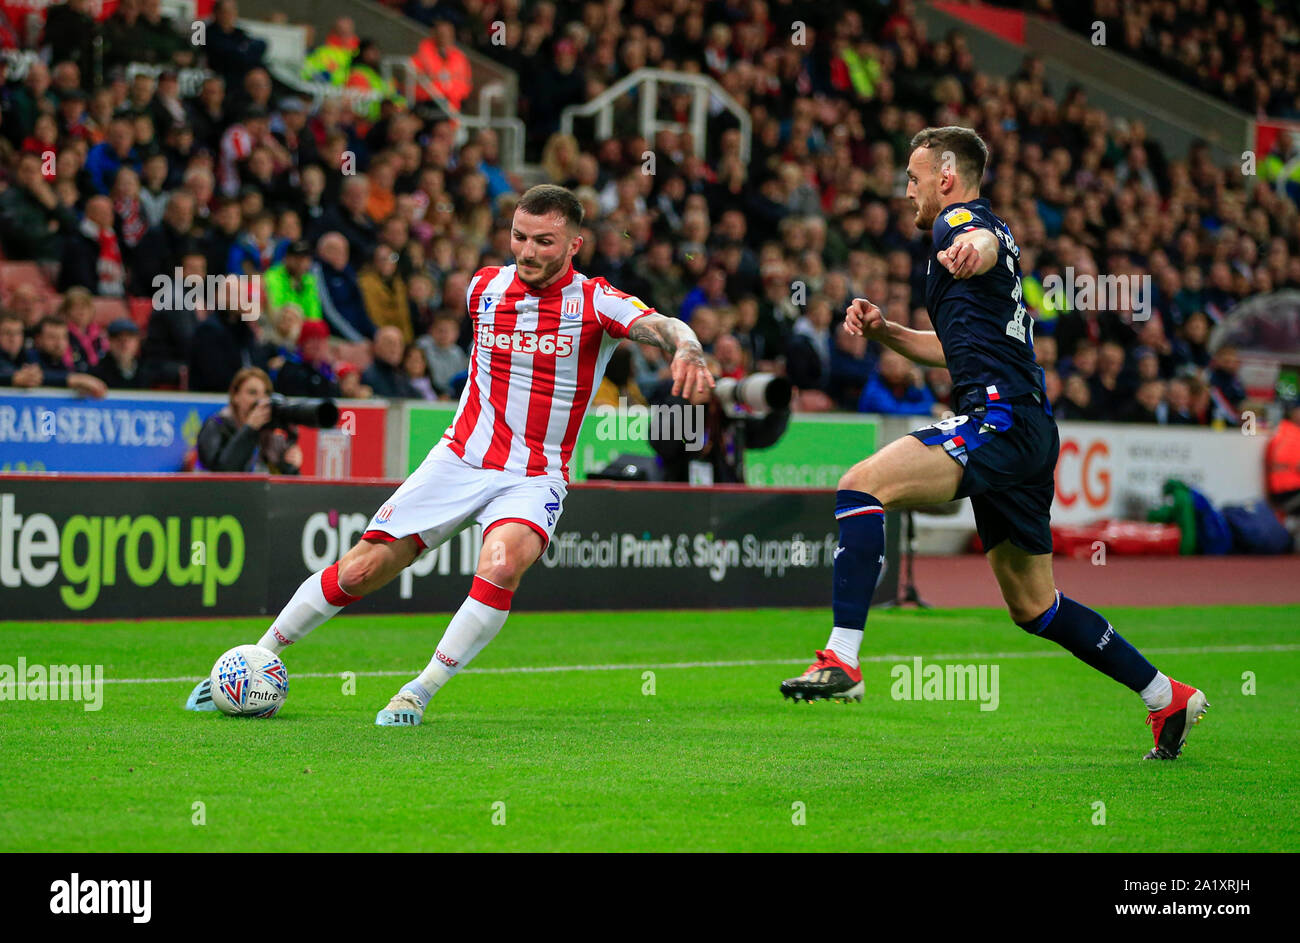 27th September 2019, Bet365 Stadium, Stoke-on-Trent, England; Sky Bet Championship, Stoke City v Nottingham Forest : Tom Edwards (02) of Stoke City tries to cross the ball Credit: Conor Molloy/News Images Stock Photo